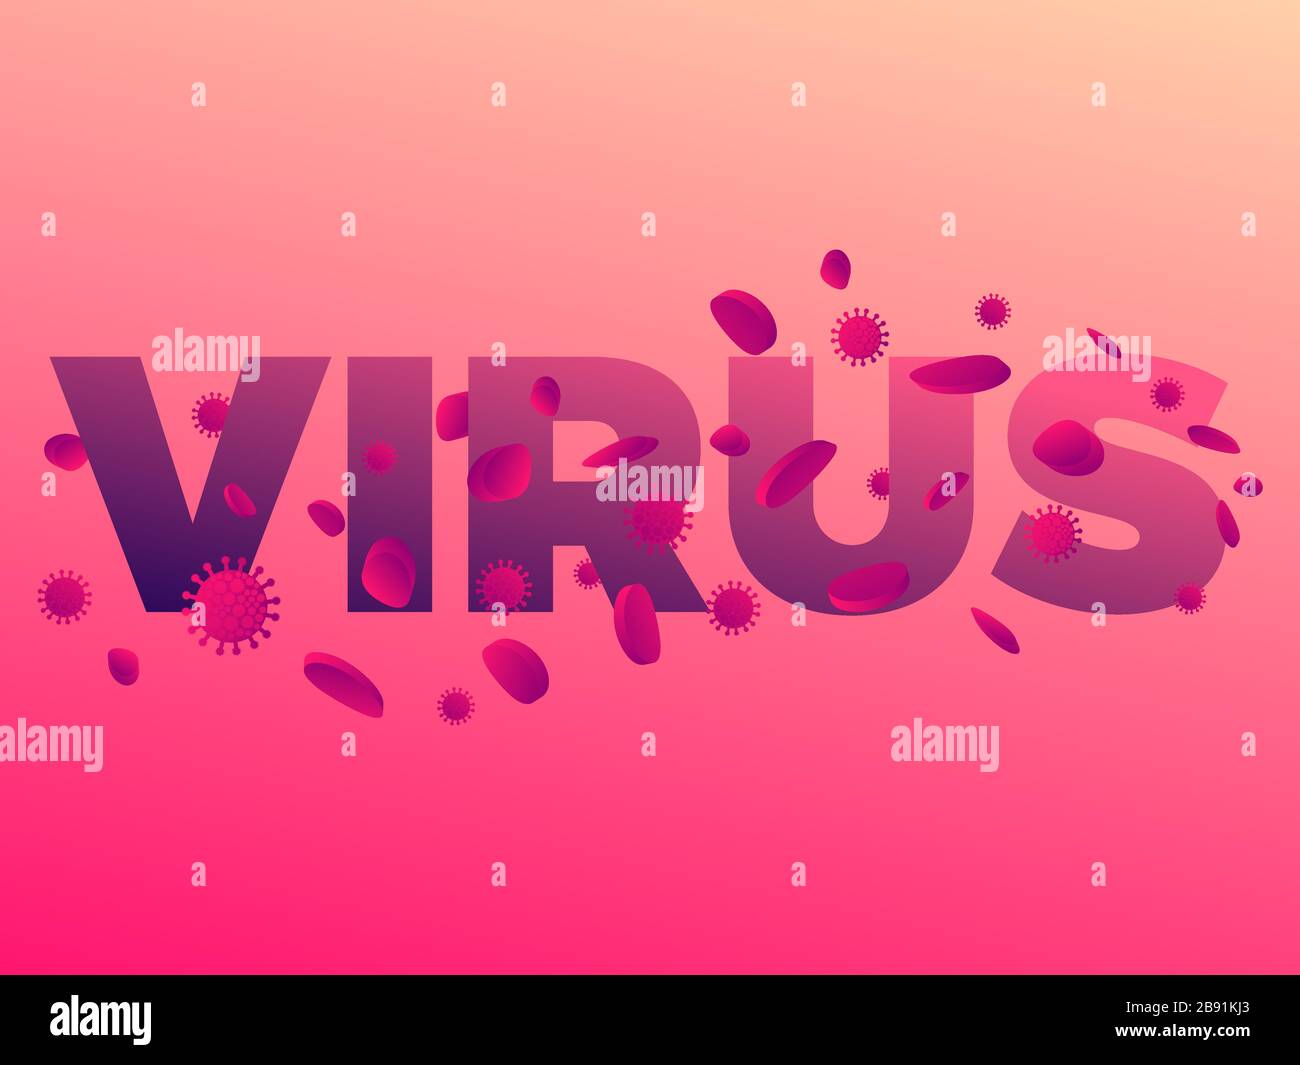 Red blood cells and viral bacteria on the background of the text. Coronavirus disease COVID-19. Vector illustration Stock Vector